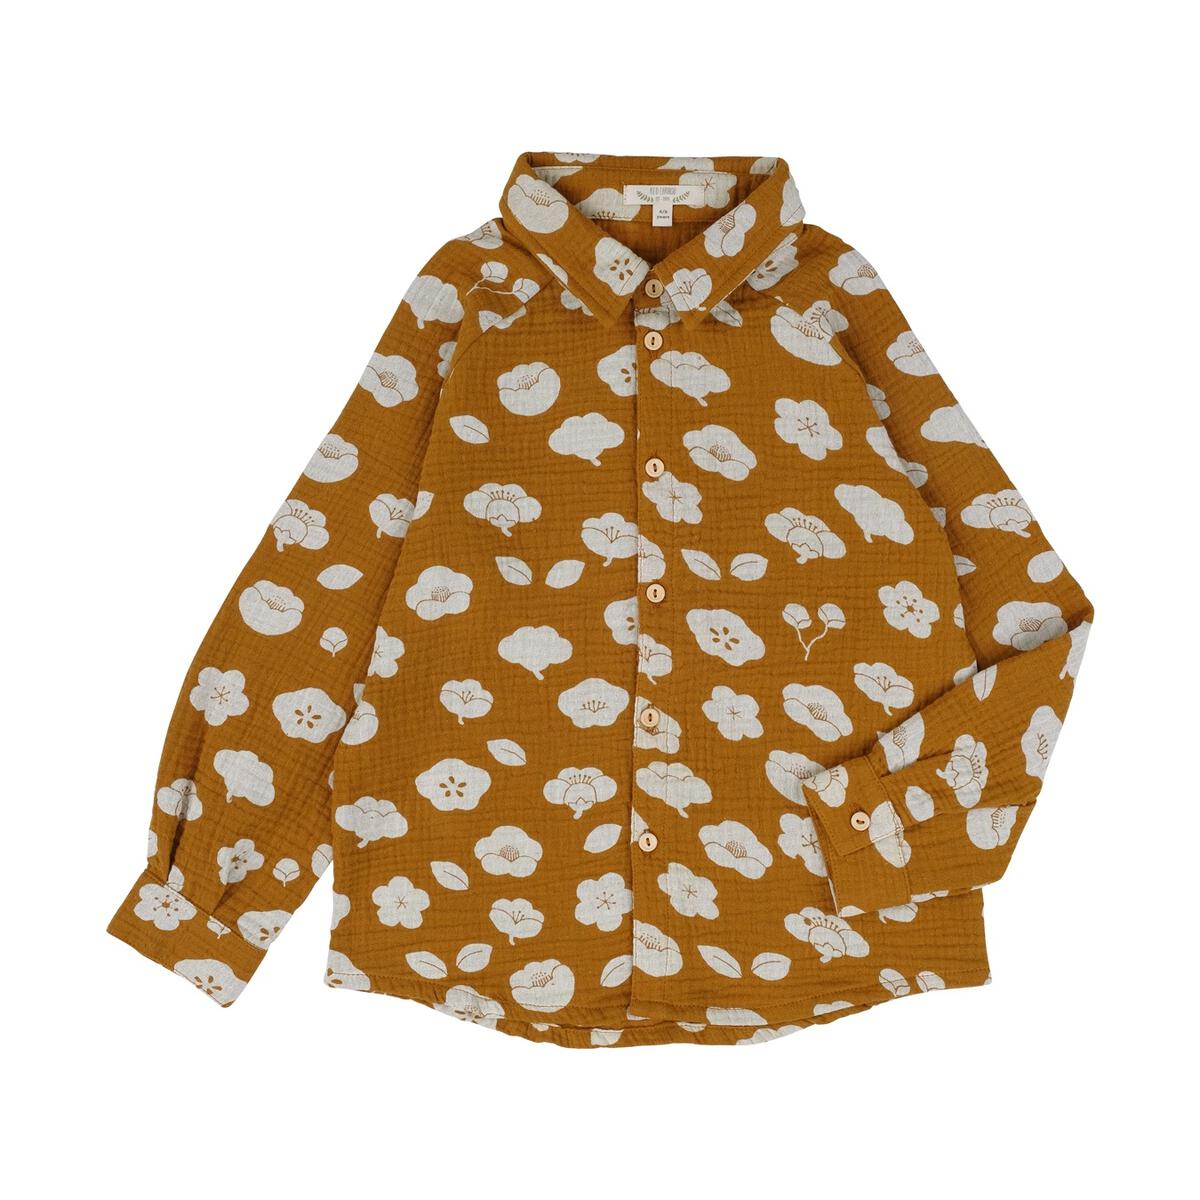 Curry Plums in Bloom Shirt